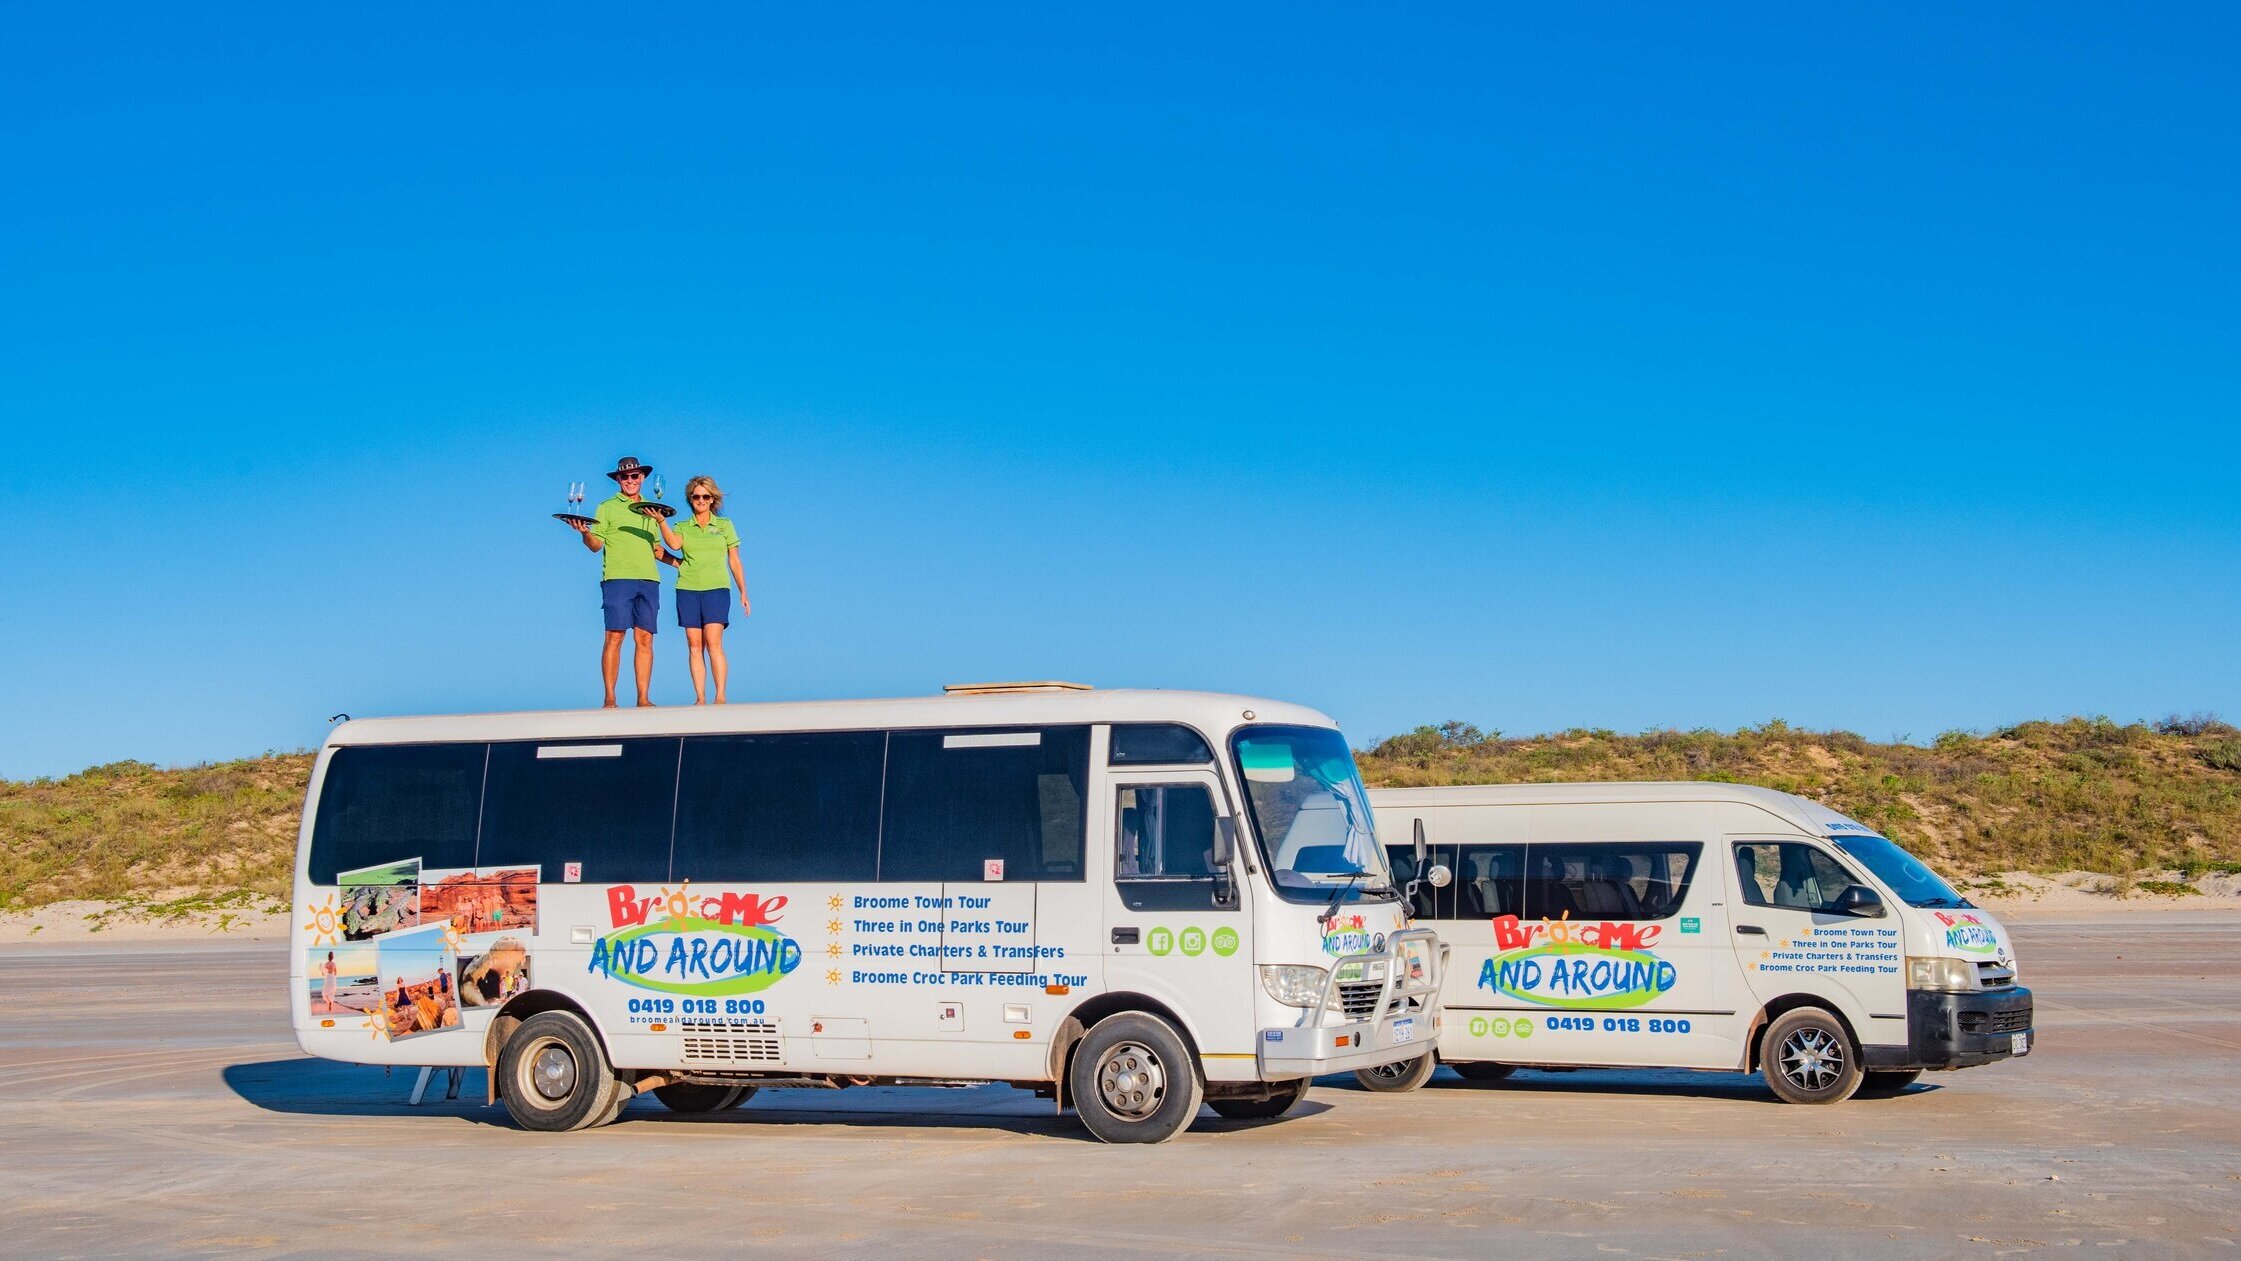 bus tours broome to perth